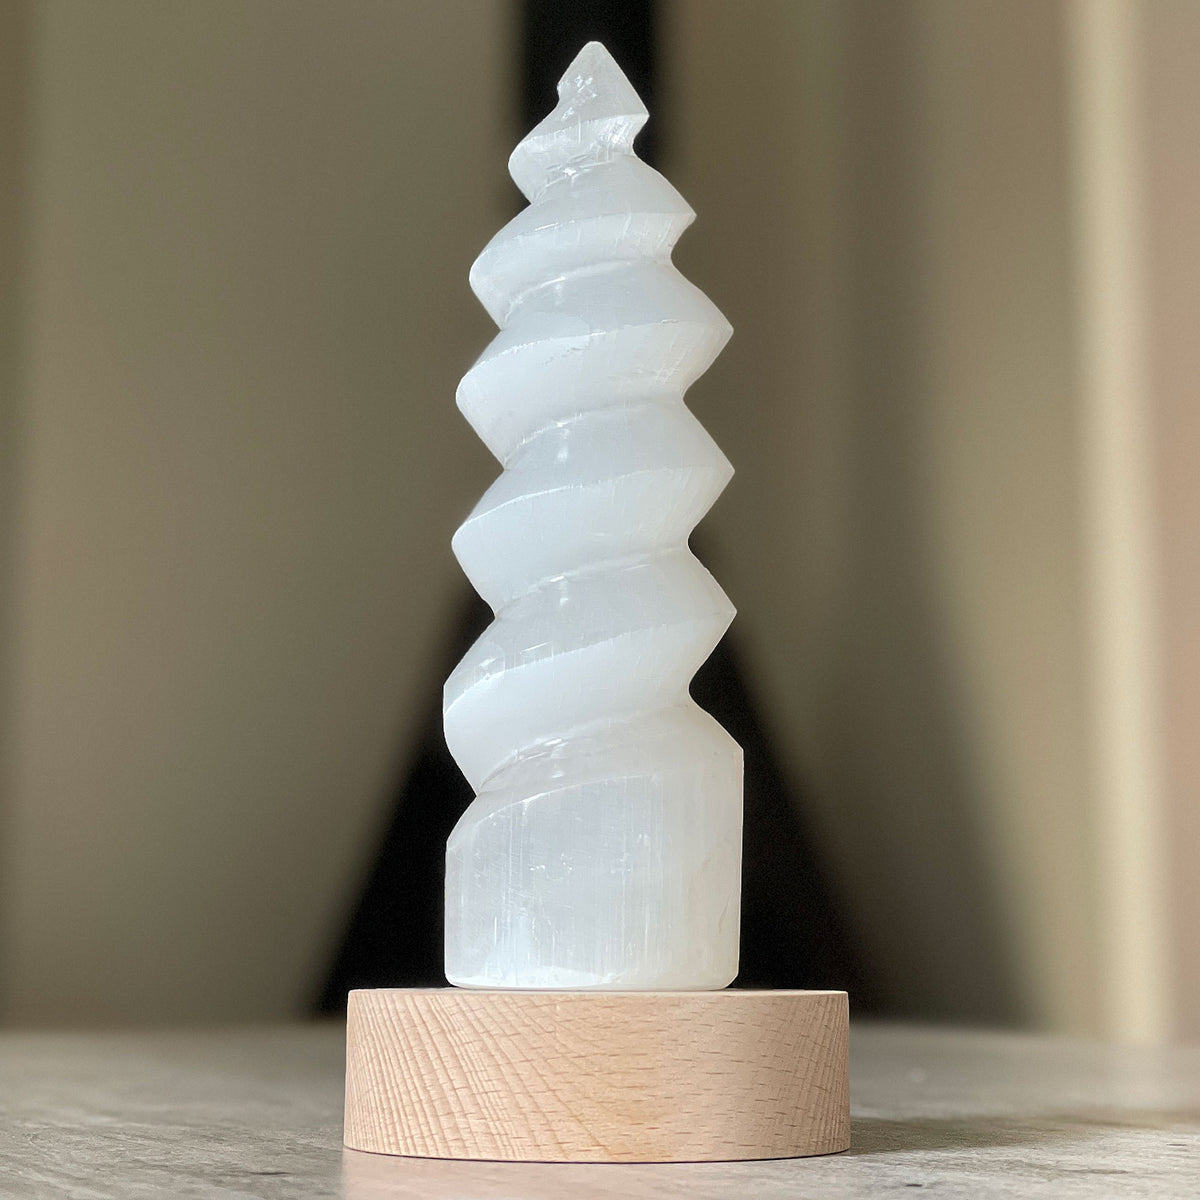 Selenite Lamp - Twister Small - Selenite is a beautiful and versatile crystal that offers numerous benefits, making it a popular choice for both decor and holistic purposes. Its natural beauty and unique translucent appearance make it an eye-catching addition to any home. Selenite emits a soft and warm glow, which makes it an excellent choice for a night light.